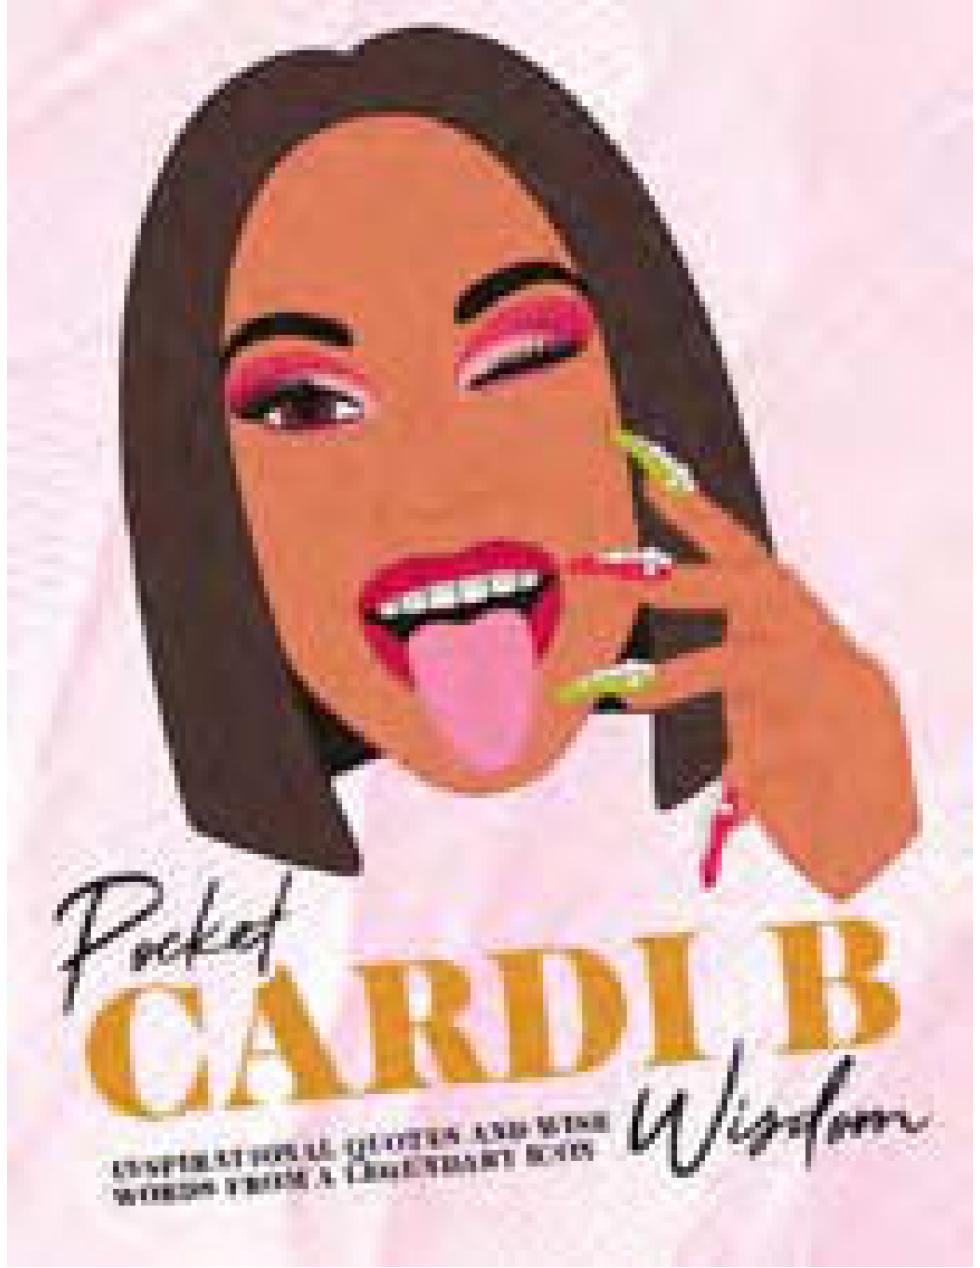 Pocket Cardi B Wisdom - Inspirational quotes and wise words from the Queen  of Rap - 9781784883164